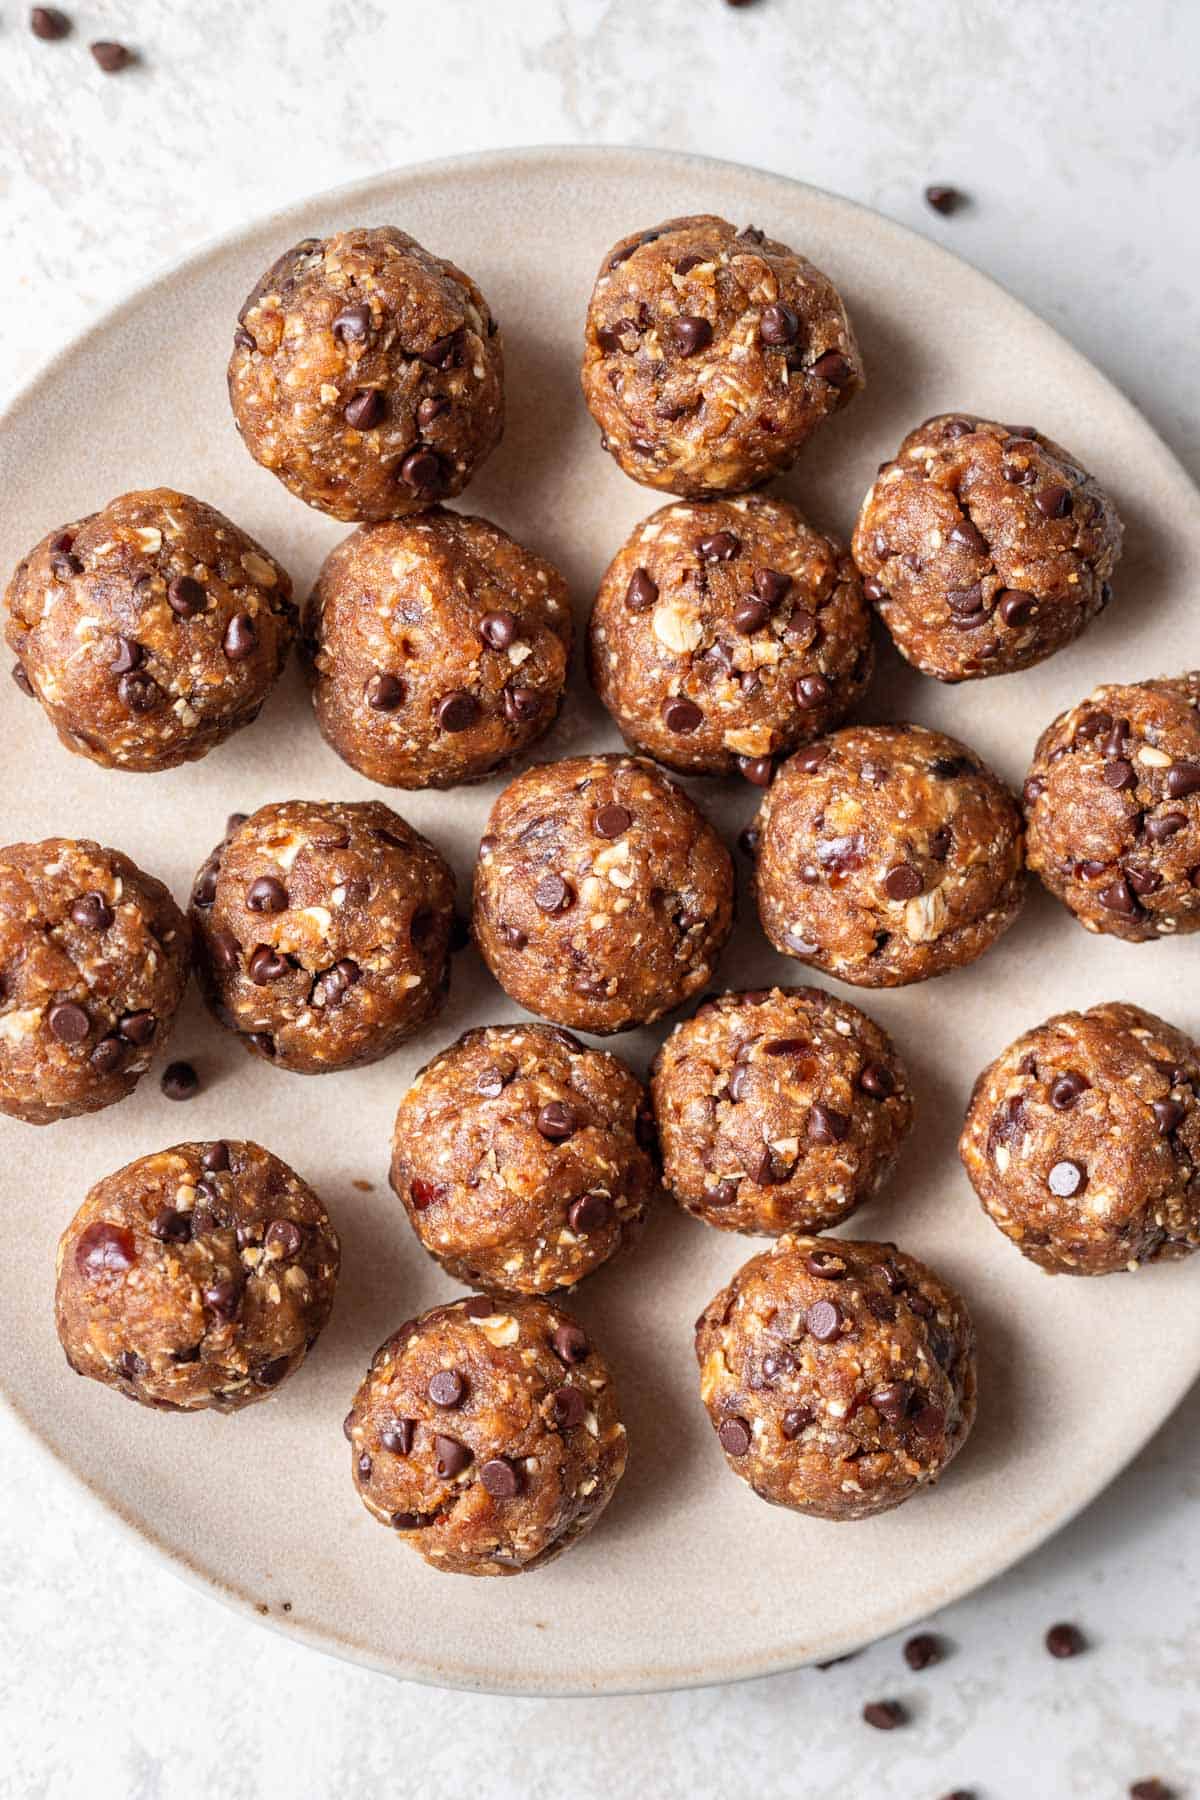 Peanut butter bliss balls with chocolate chips on a serving plate.